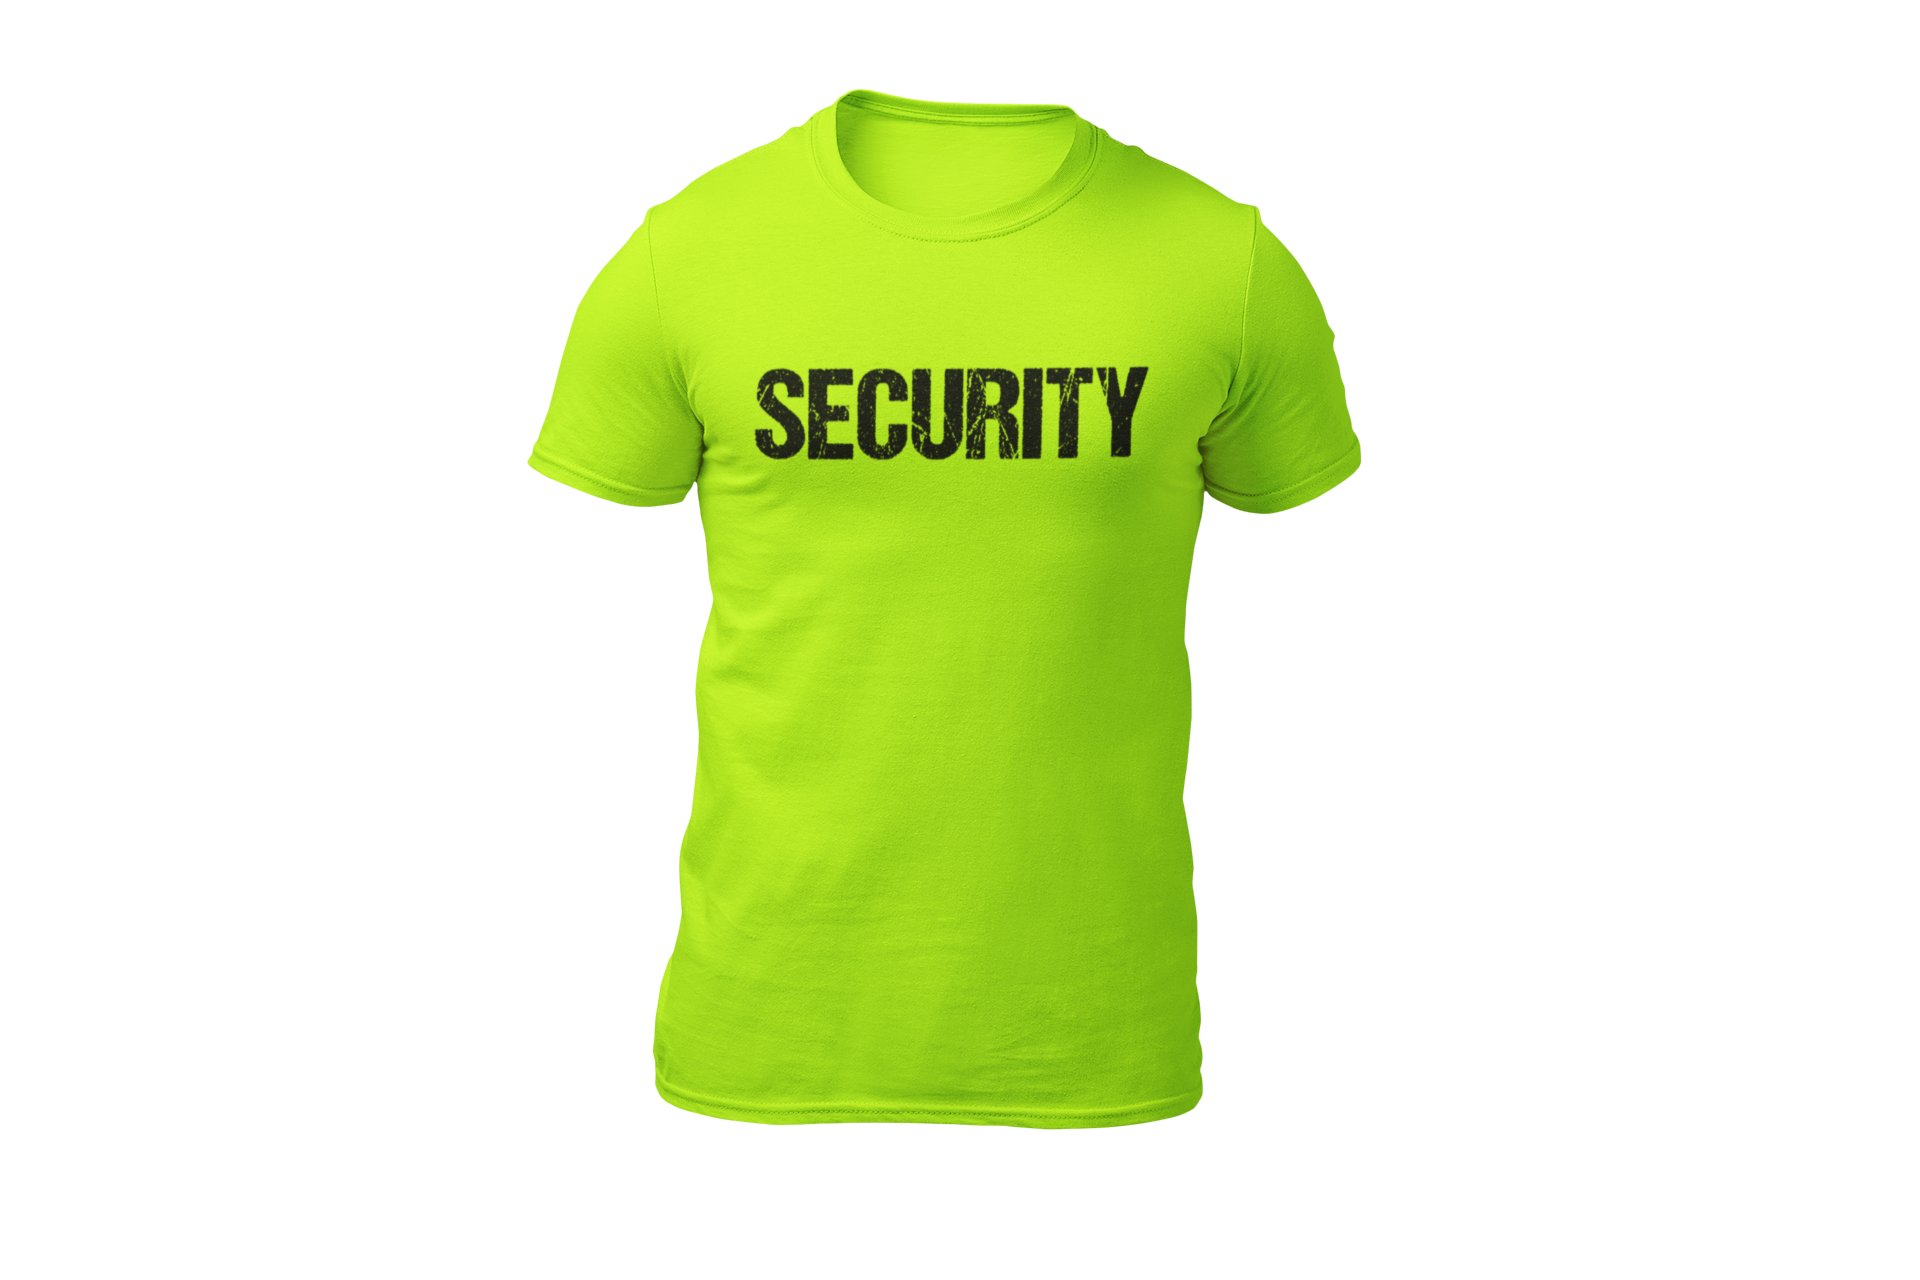 Men's Distressed Security Tee Front & Back Print (Safety Green - Black)